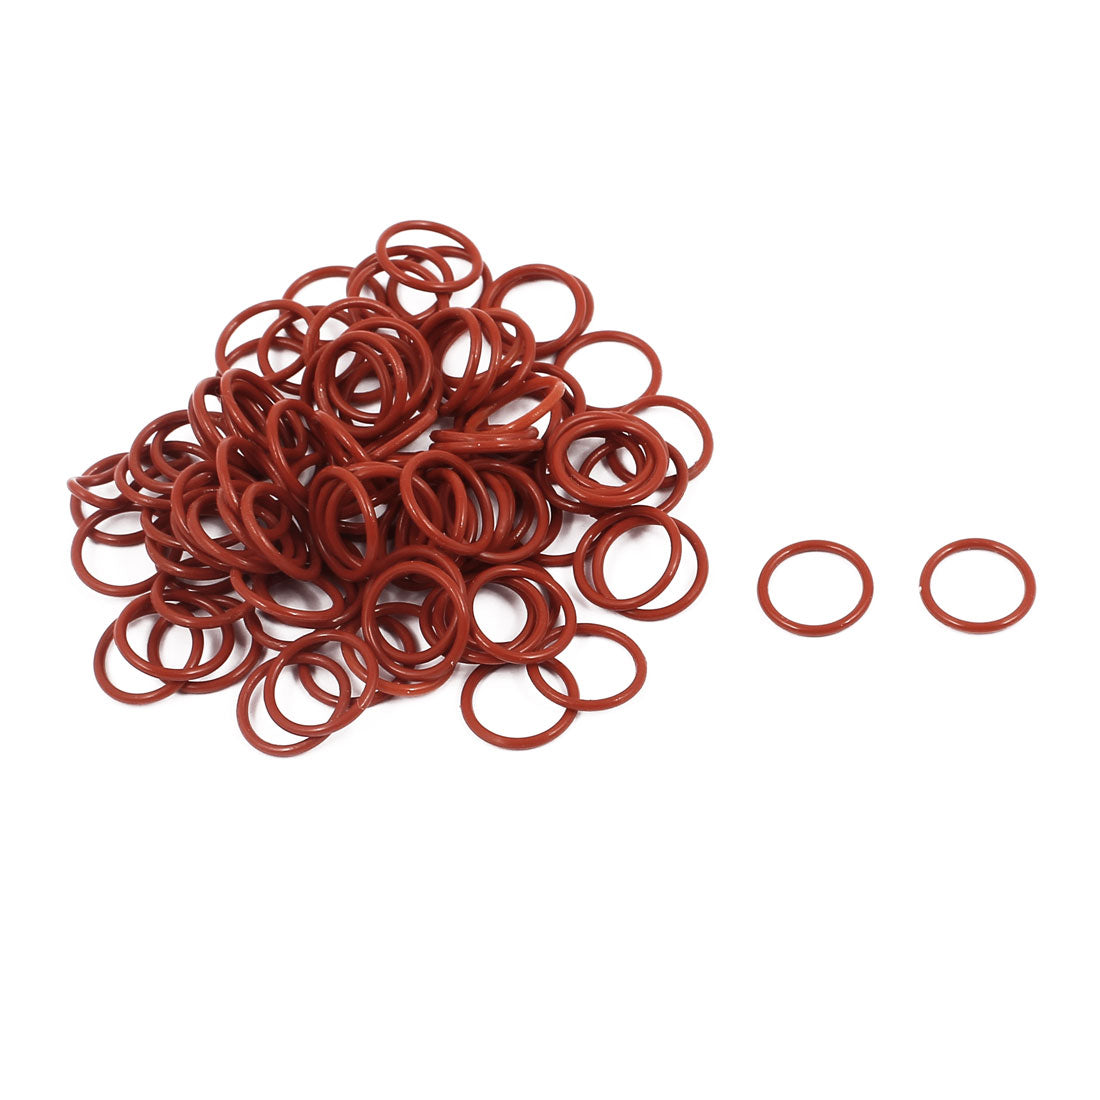 uxcell Uxcell 100Pcs 10mm x 1mm Rubber O-rings NBR Heat Resistant Sealing Ring Grommets Red